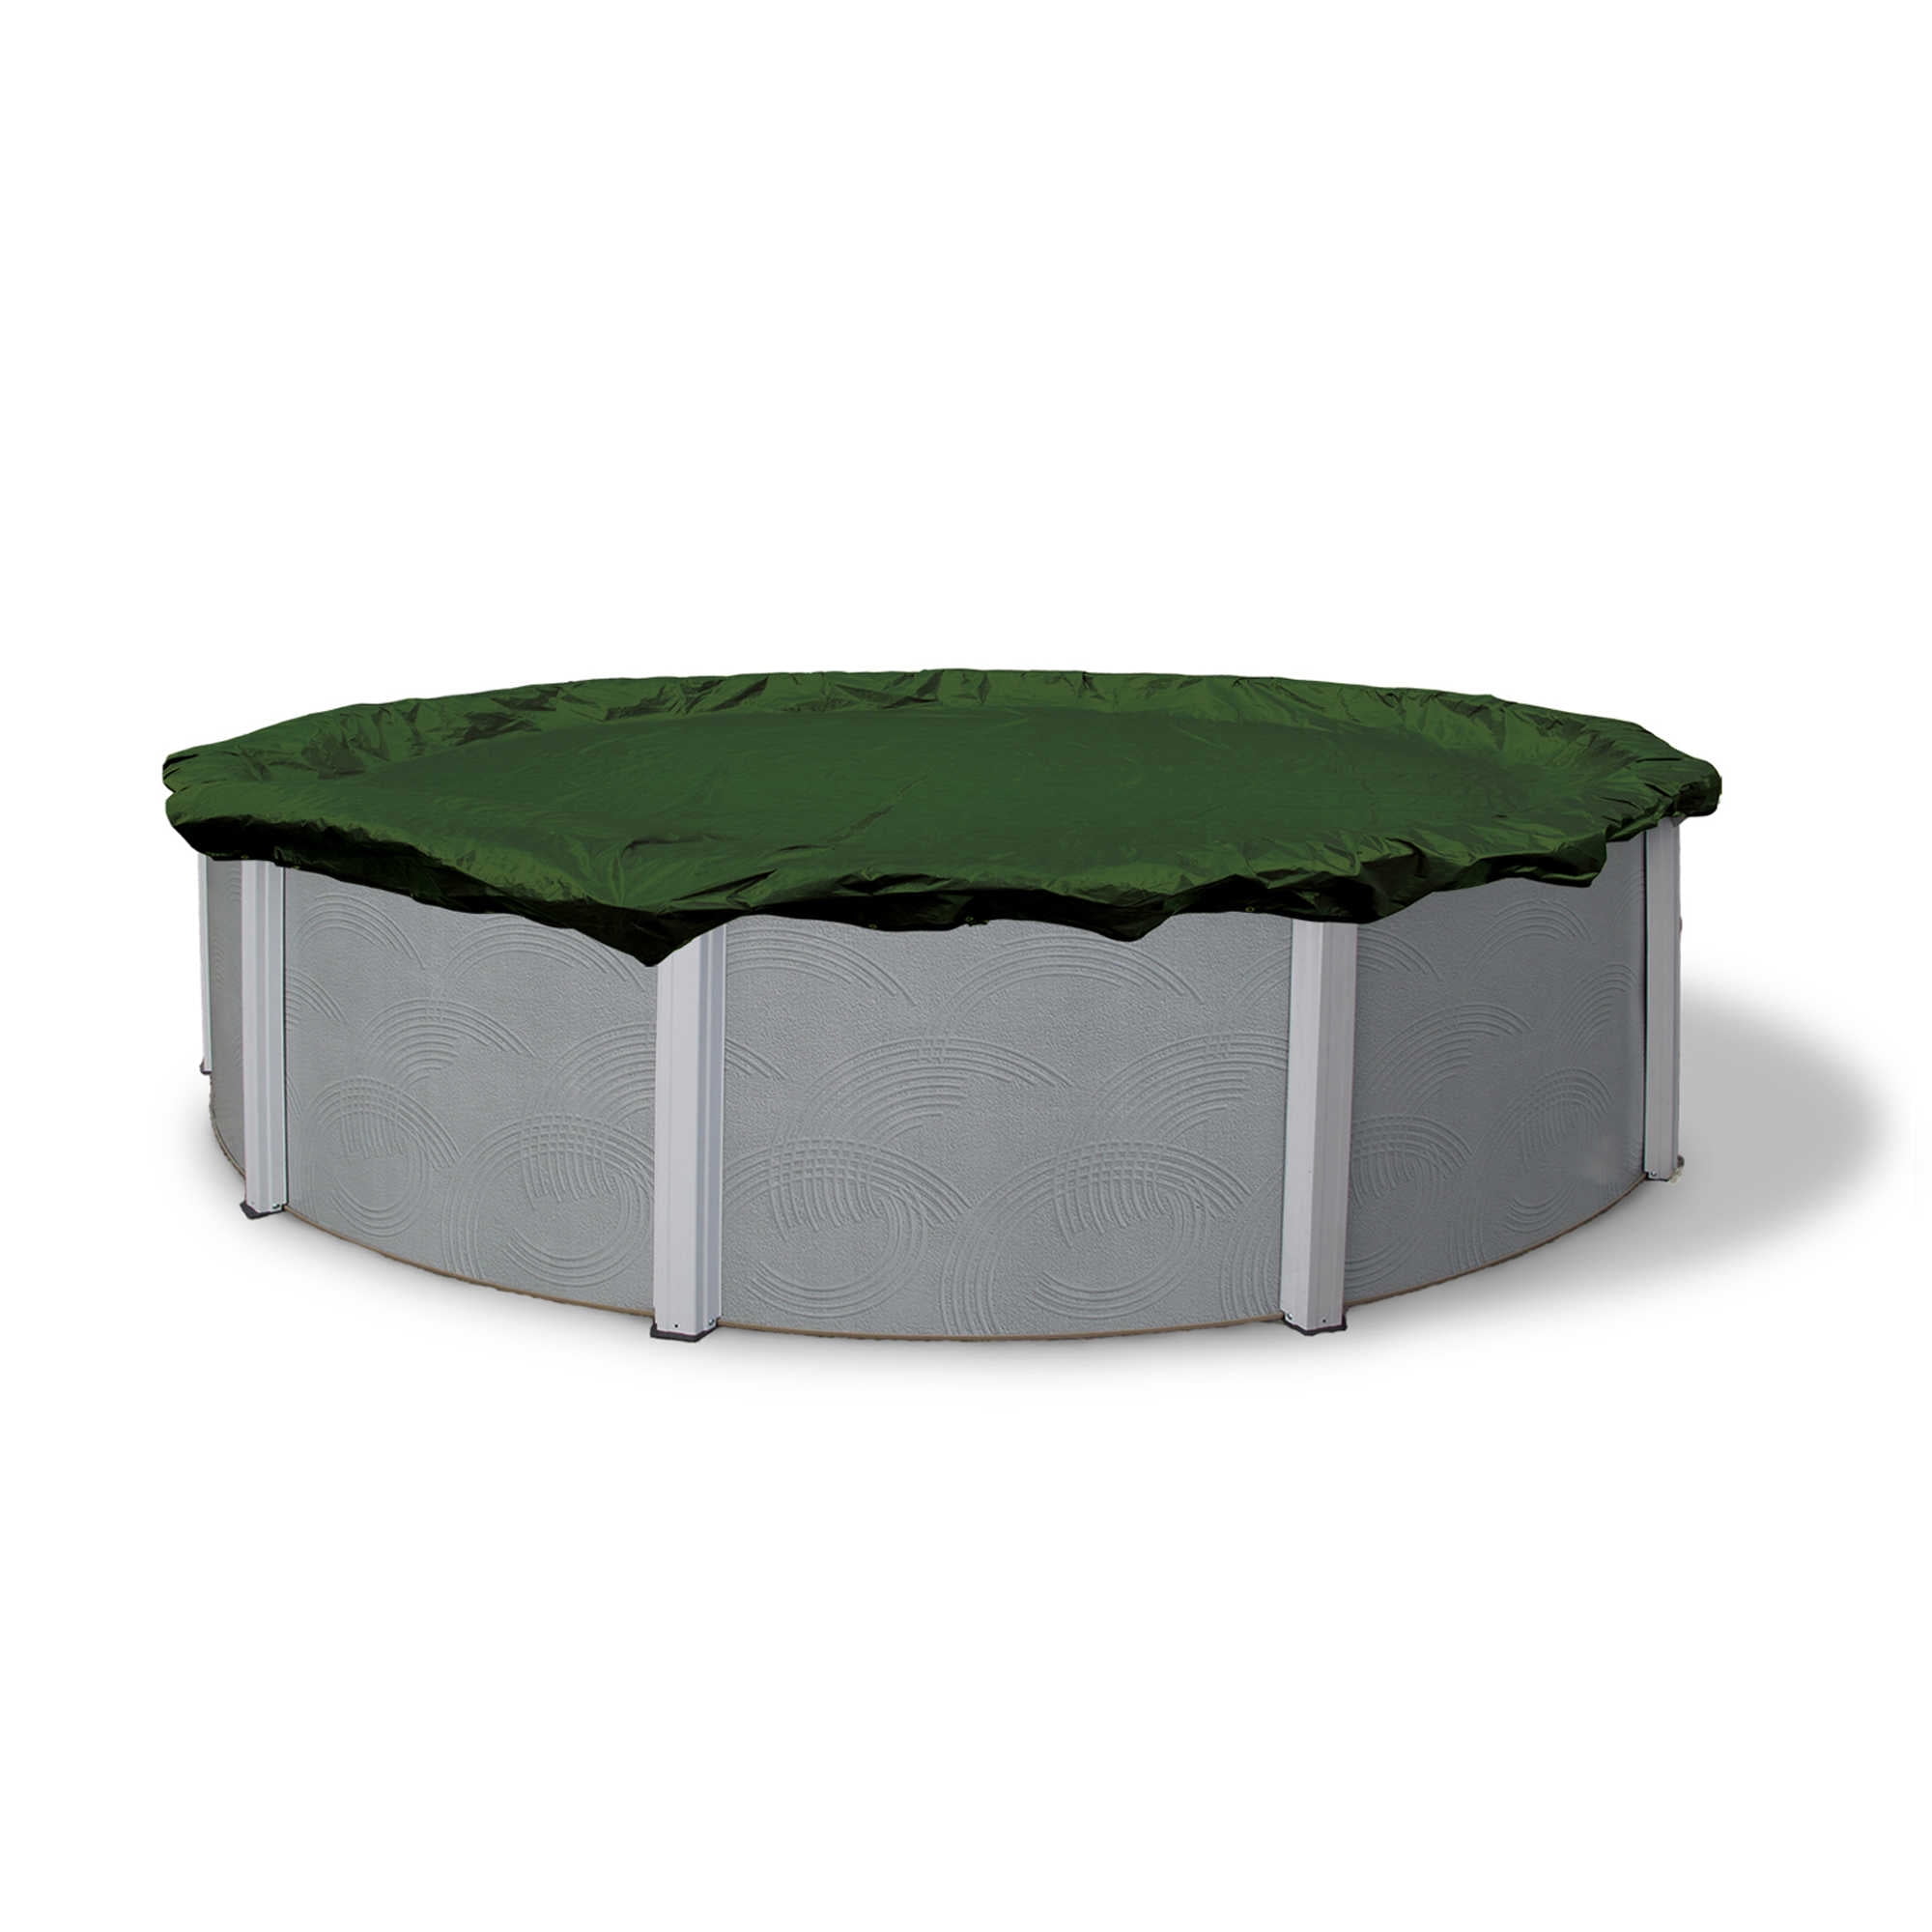 Round Supreme Plus Green & Black Swimming Pool Winter Cover Various Sizes 